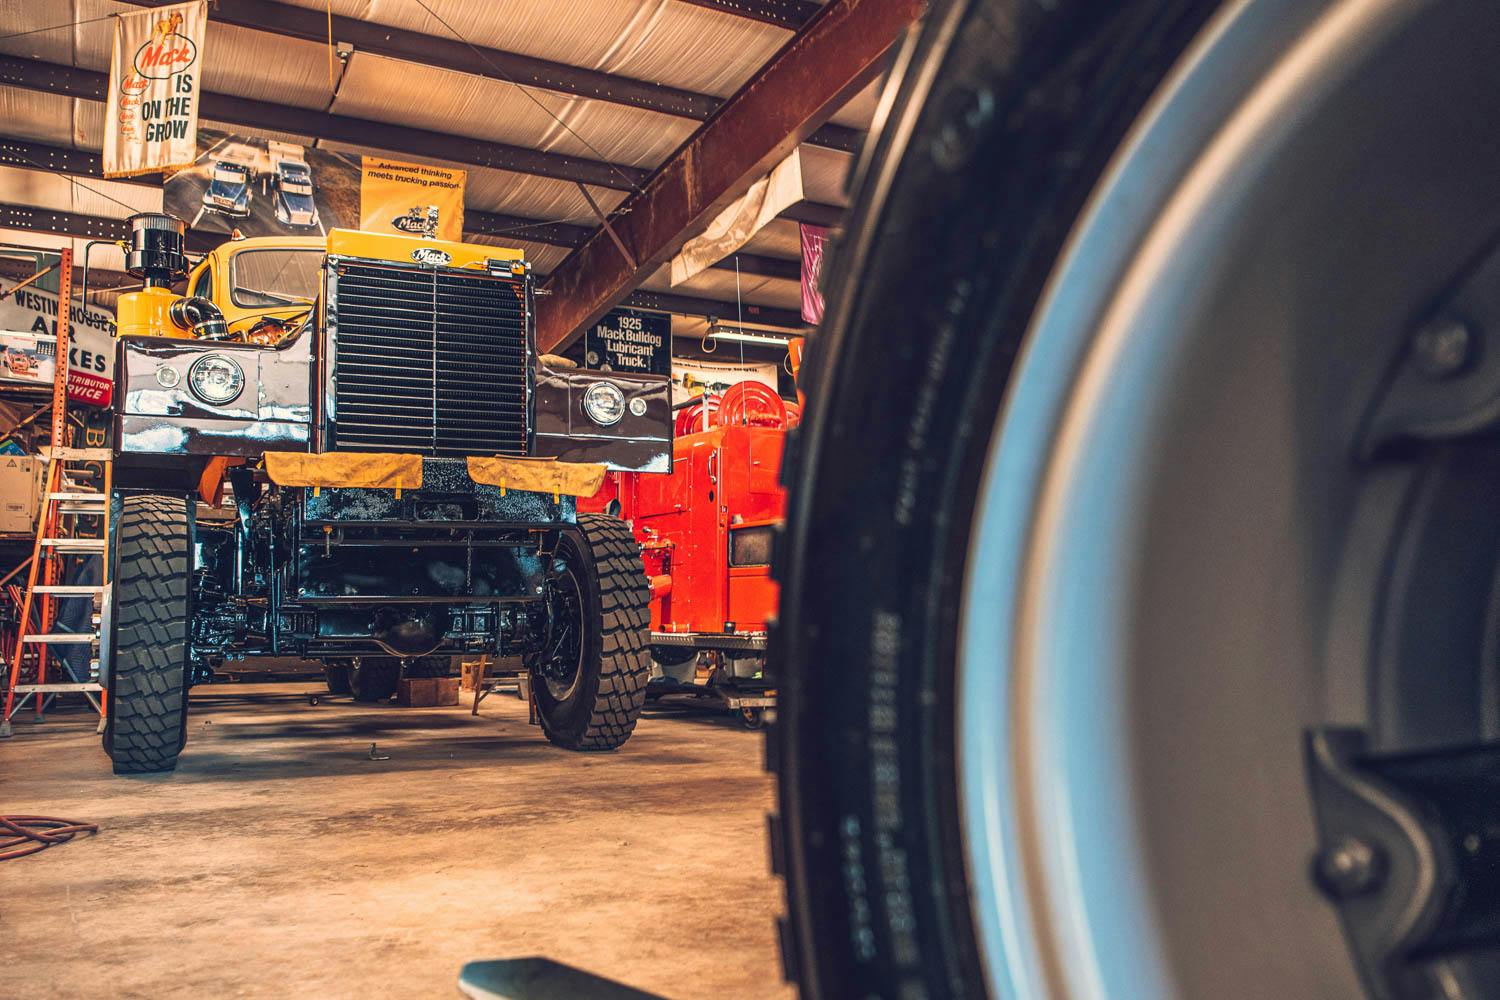 Think your project is big? This shop takes on Mack trucks